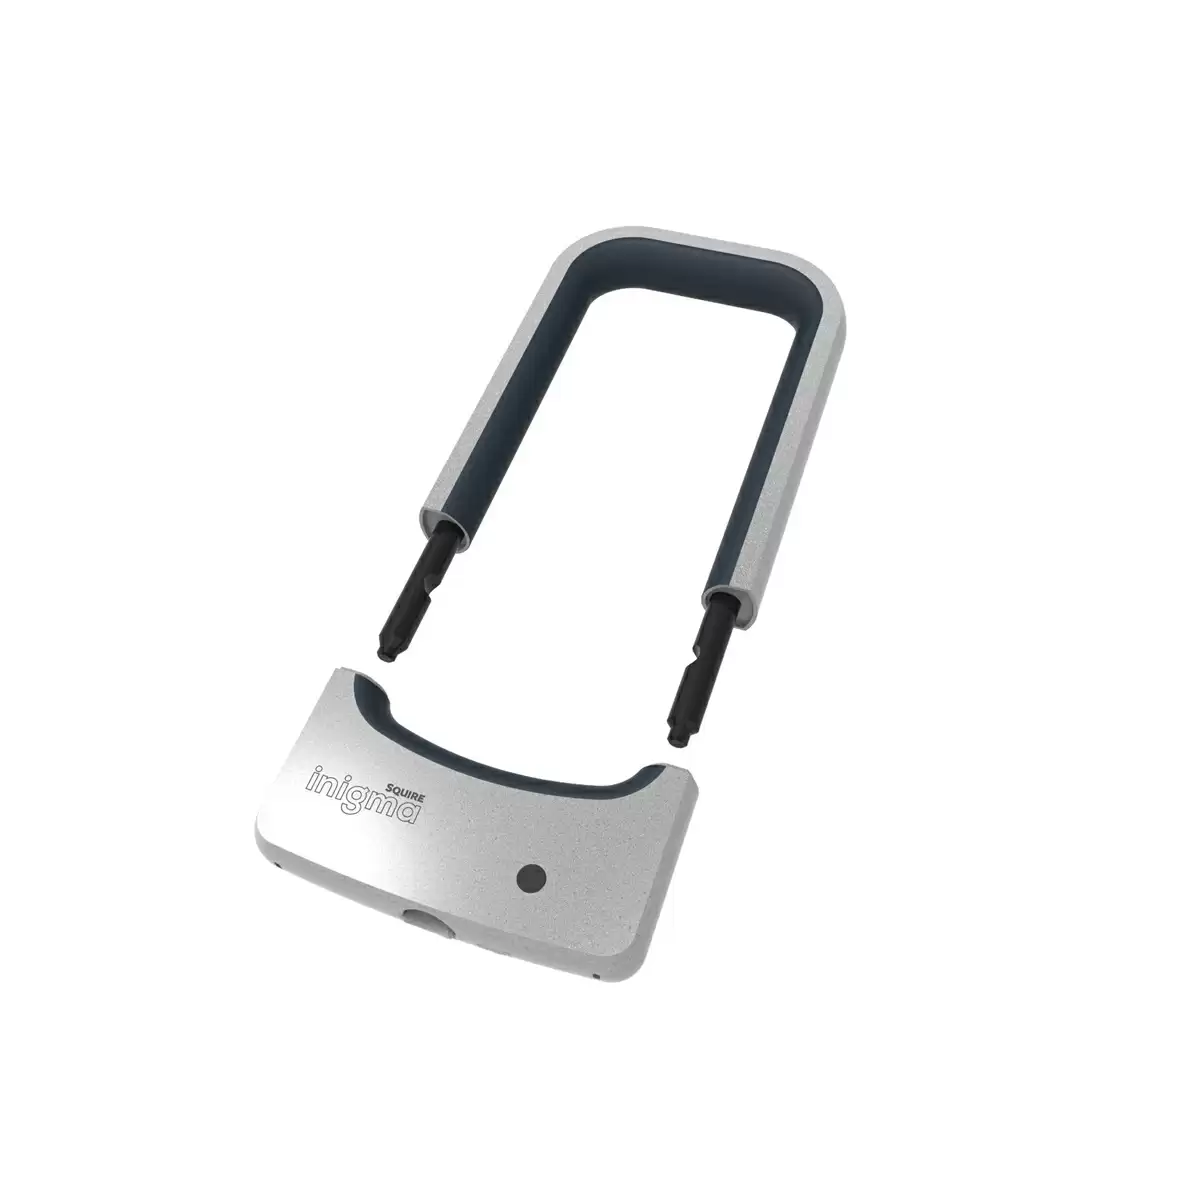 Bluetooth Bikelock Inigma BL1 190mm open / closure with Smartphone - image